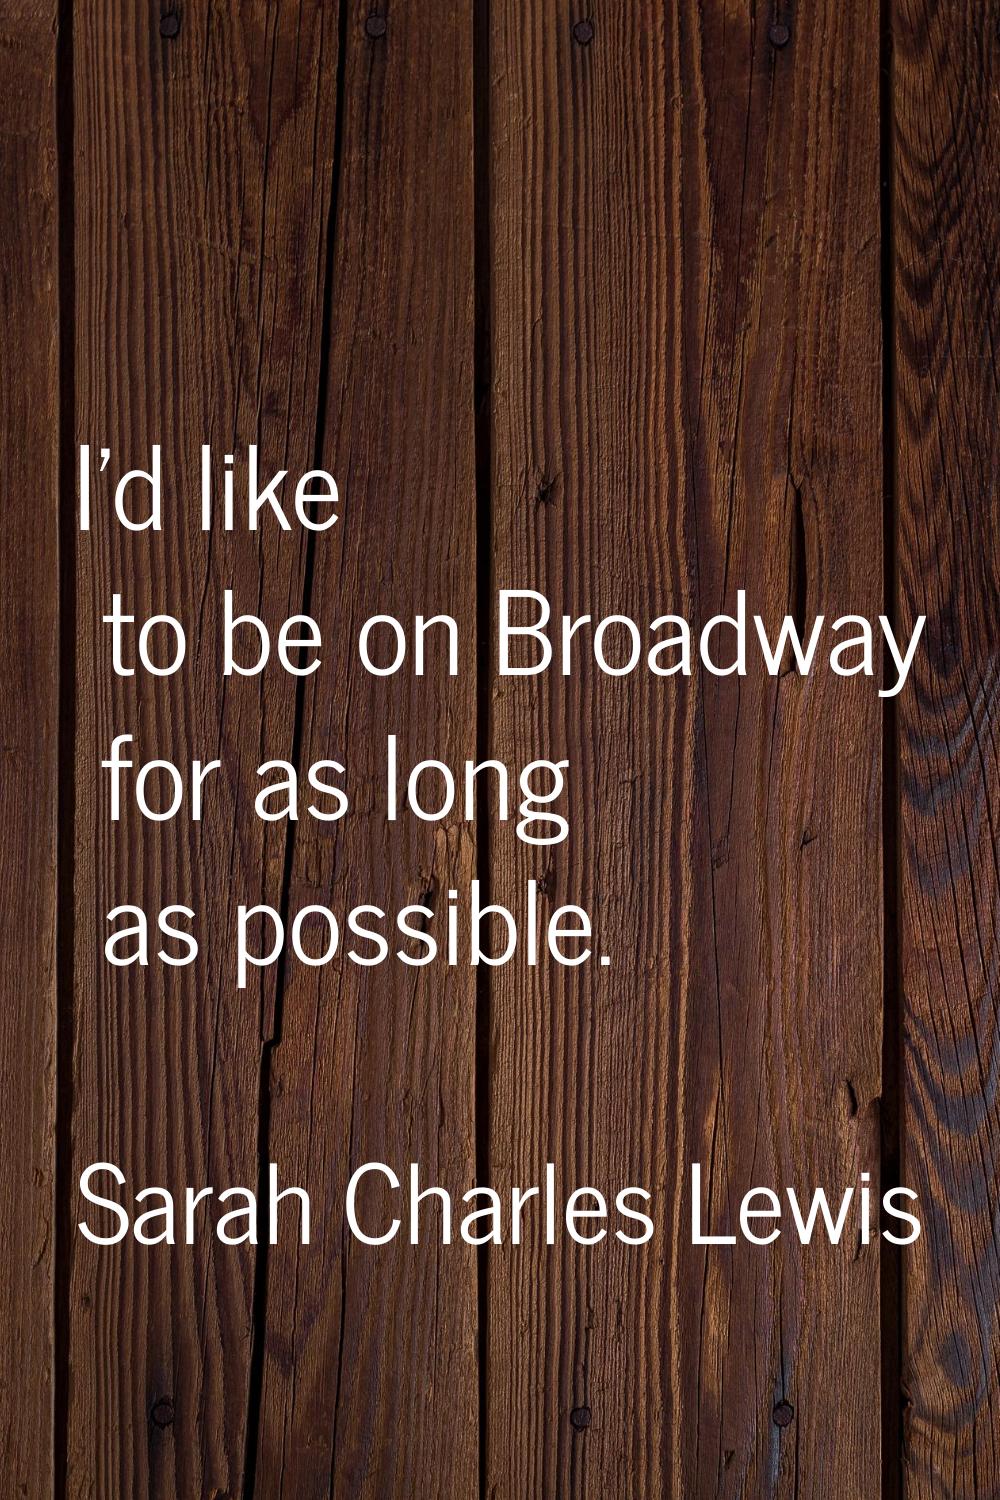 I'd like to be on Broadway for as long as possible.